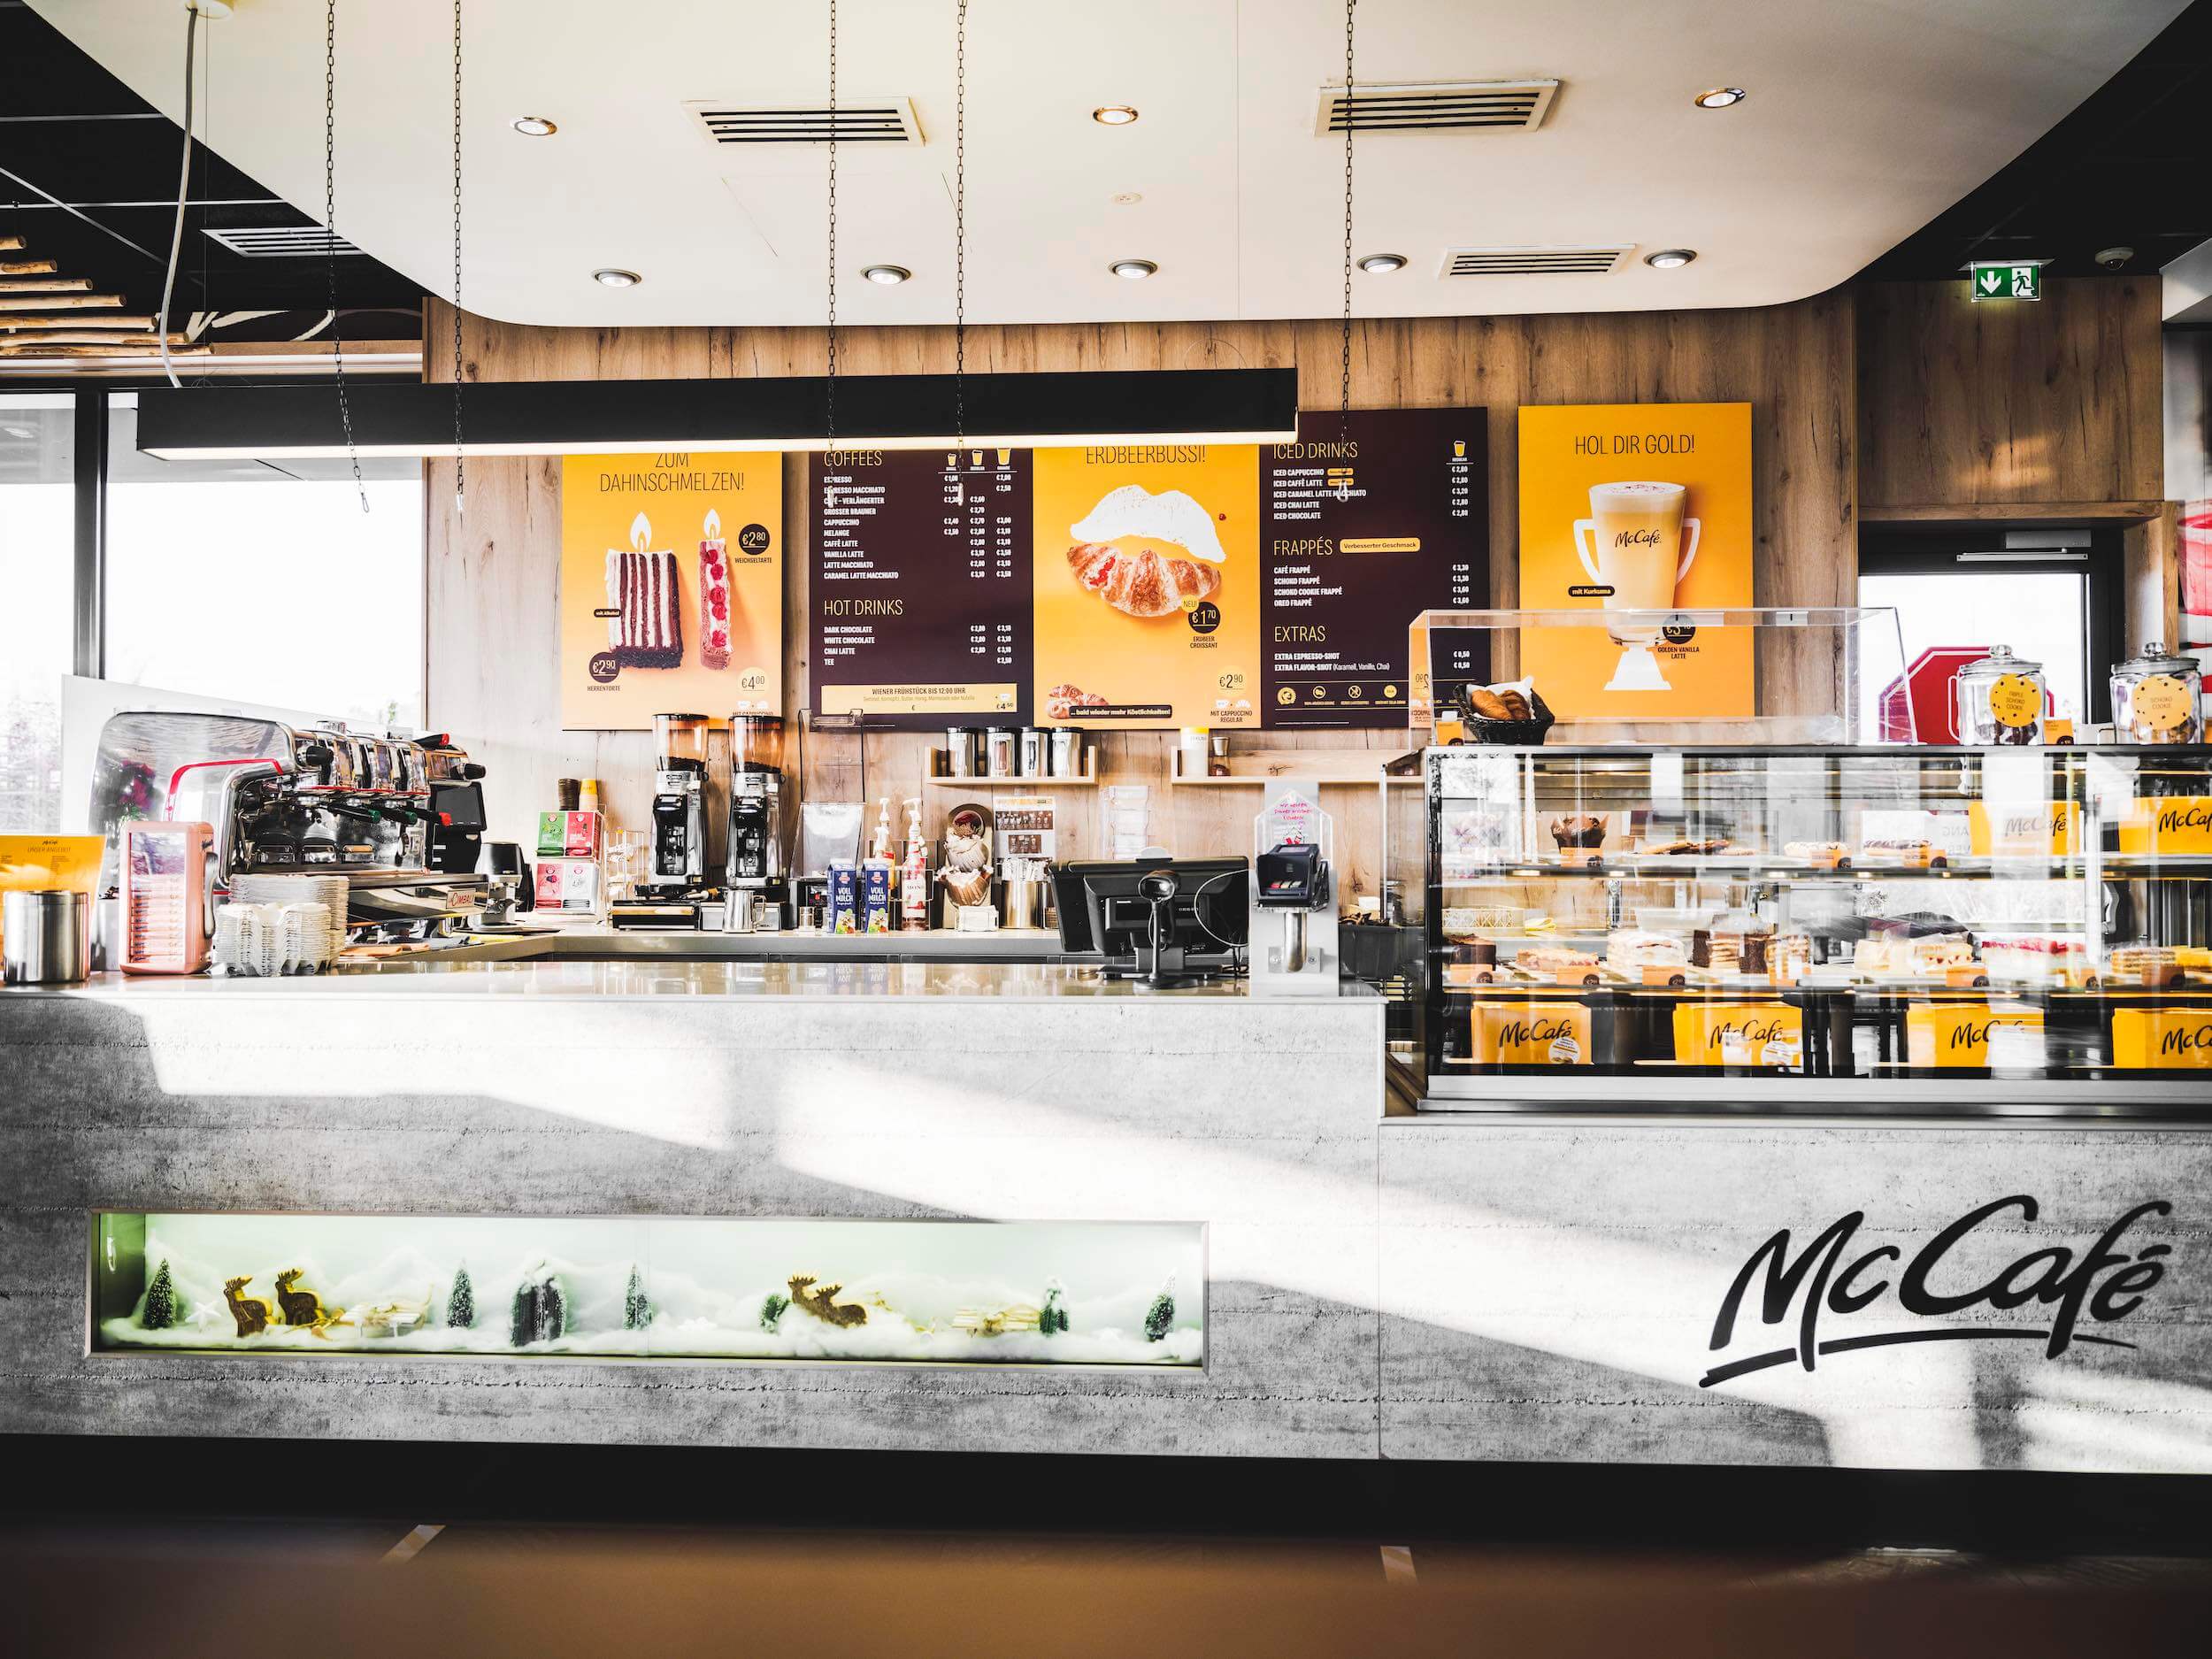 McCafe counter with menu wall signs